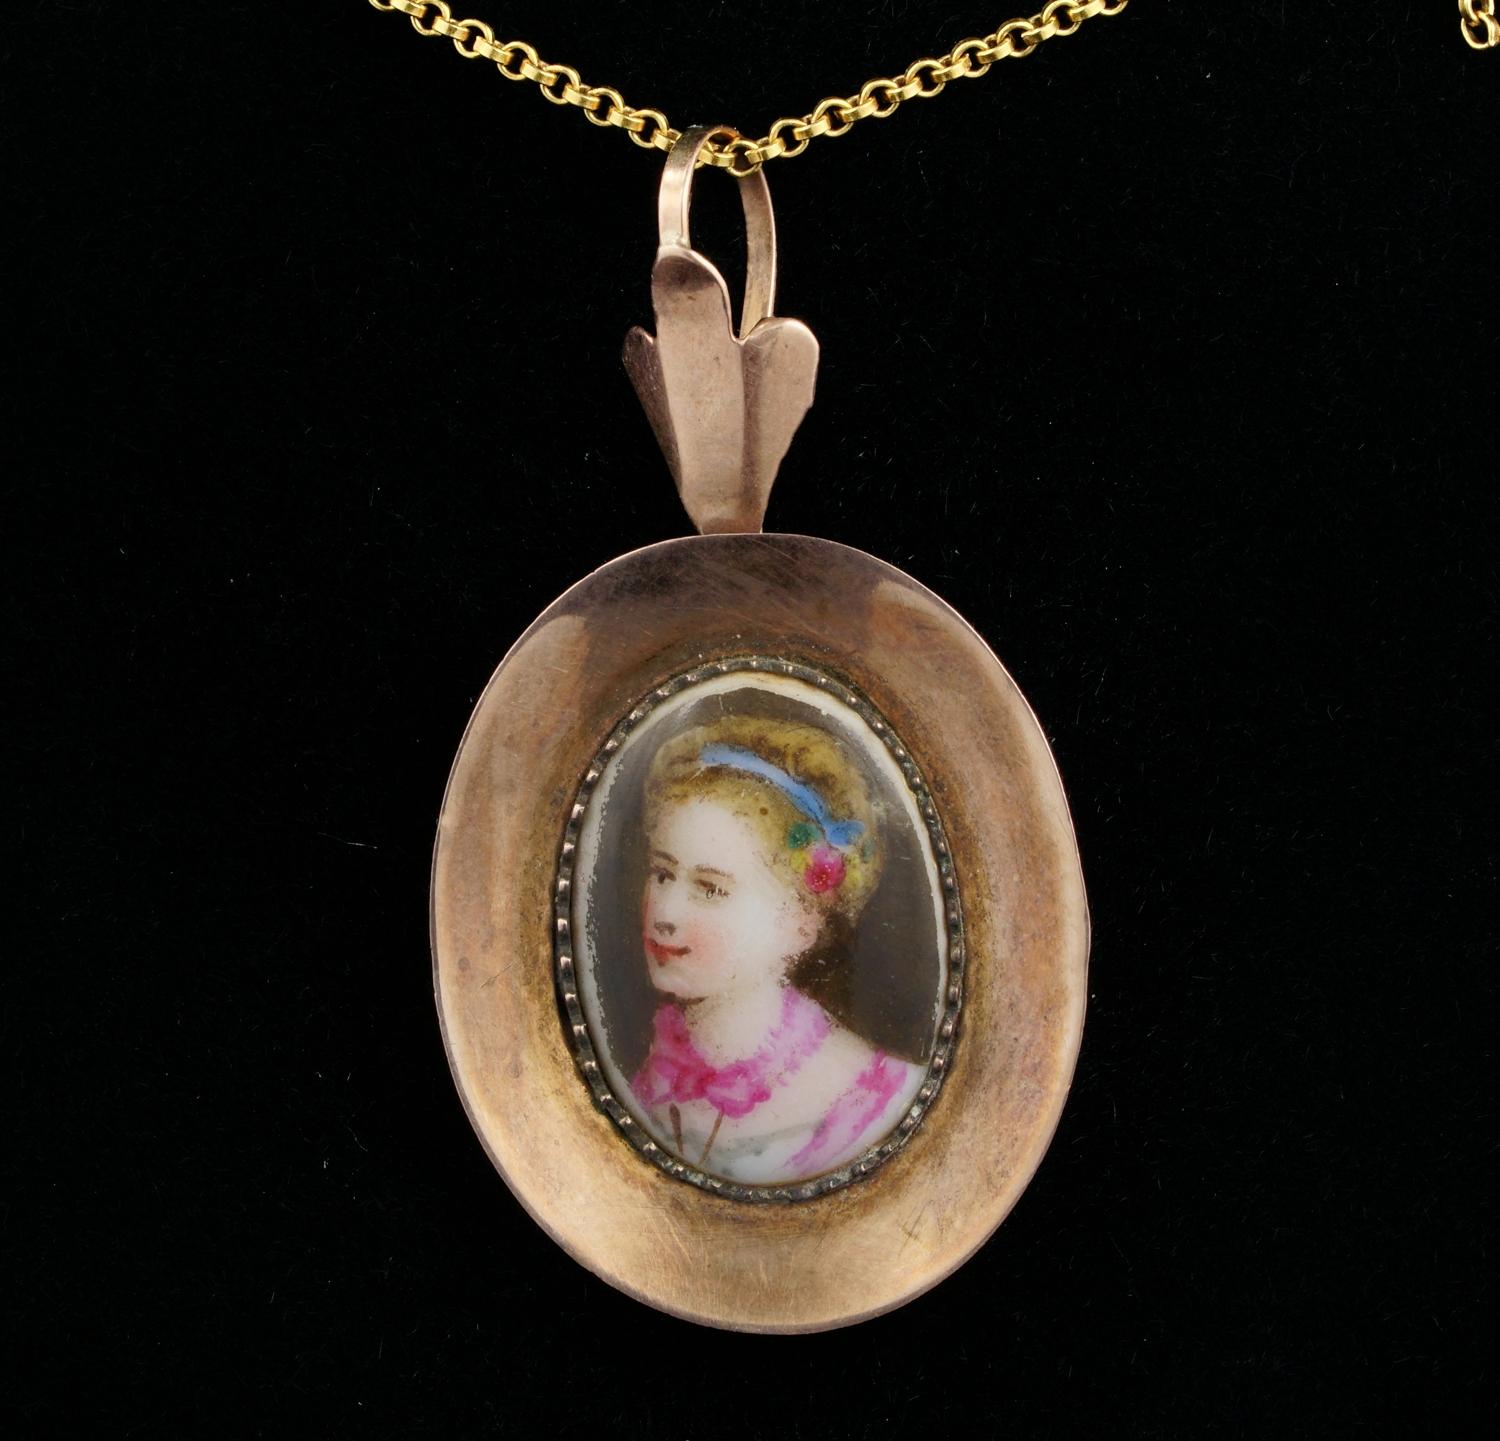 Past Beauties Portrait 

During 18th towards the 19th century or even earlier than that, sharing images of someone loved was possible only with artistry made hand painted miniature depicting portraits to keep close
This is a gorgeous Victorian